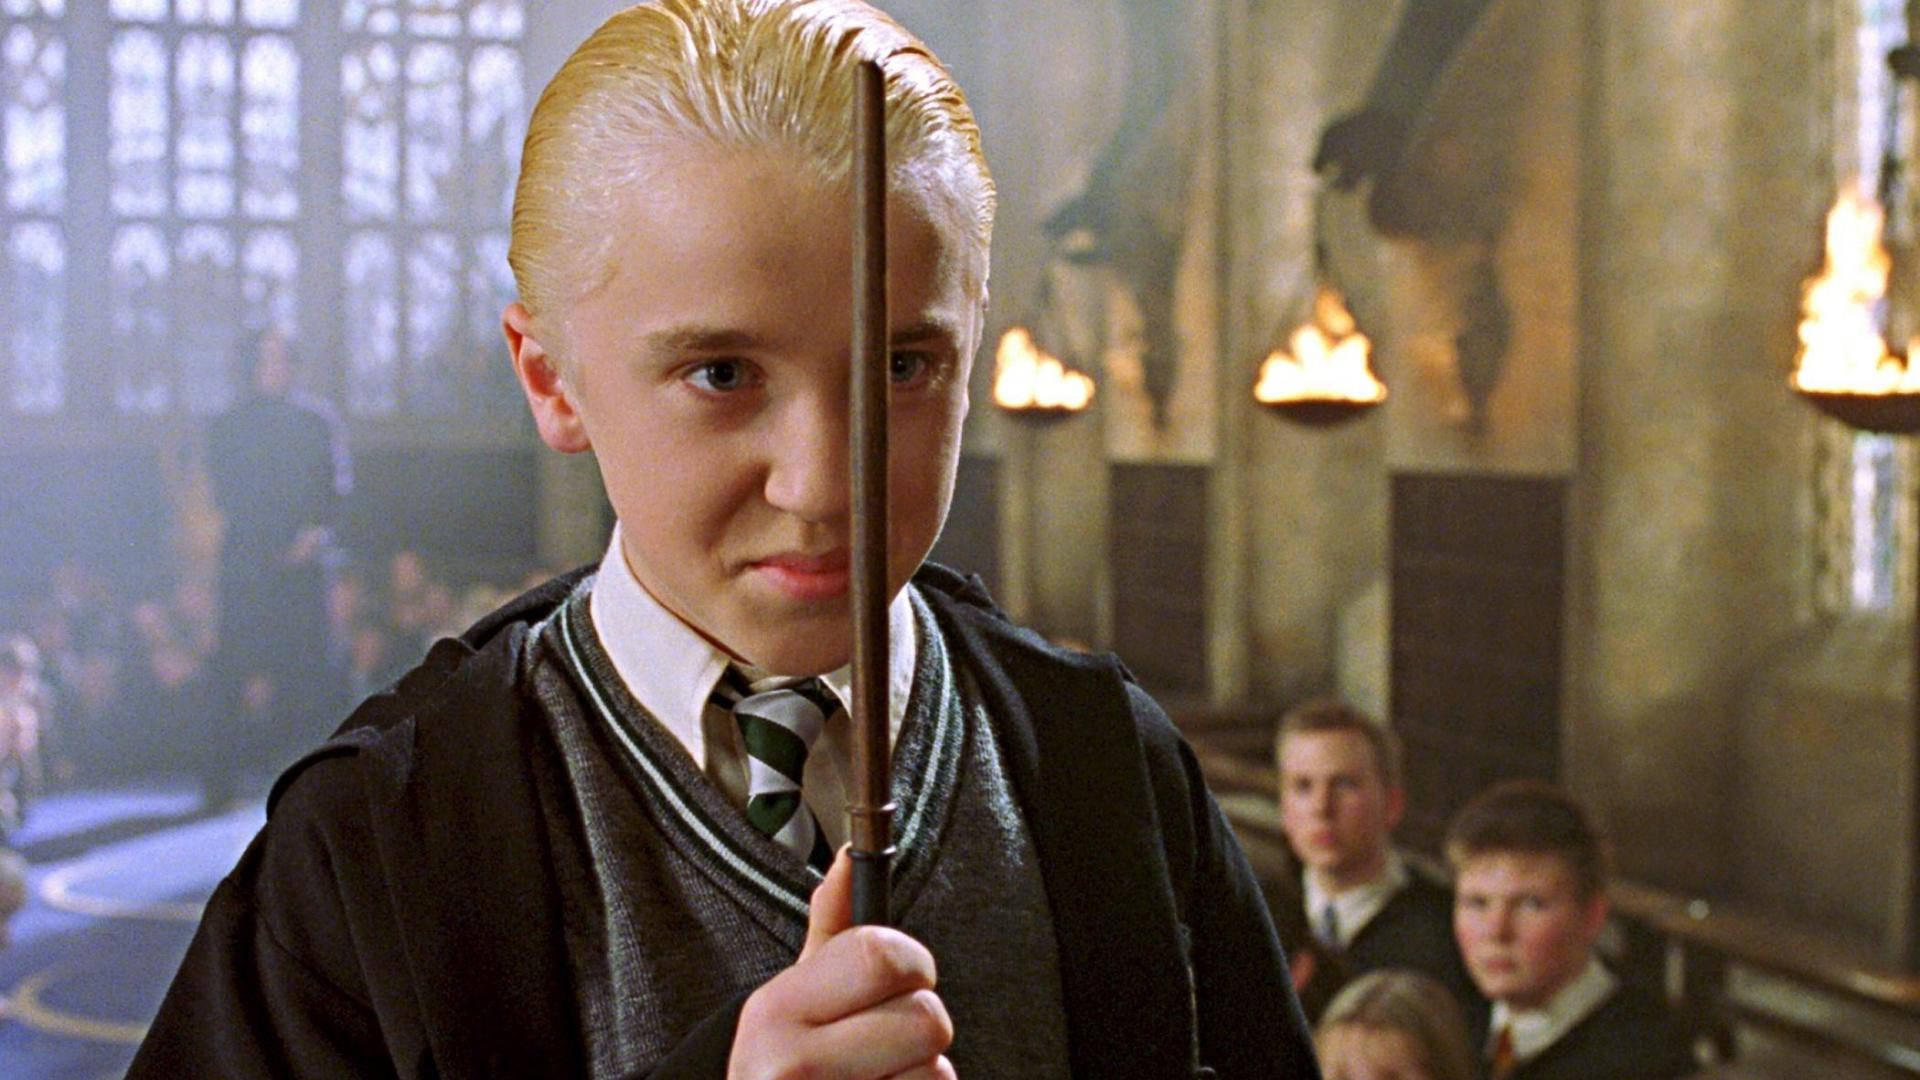 72 Draco Malfoy Photos & High Res Pictures - Getty Images